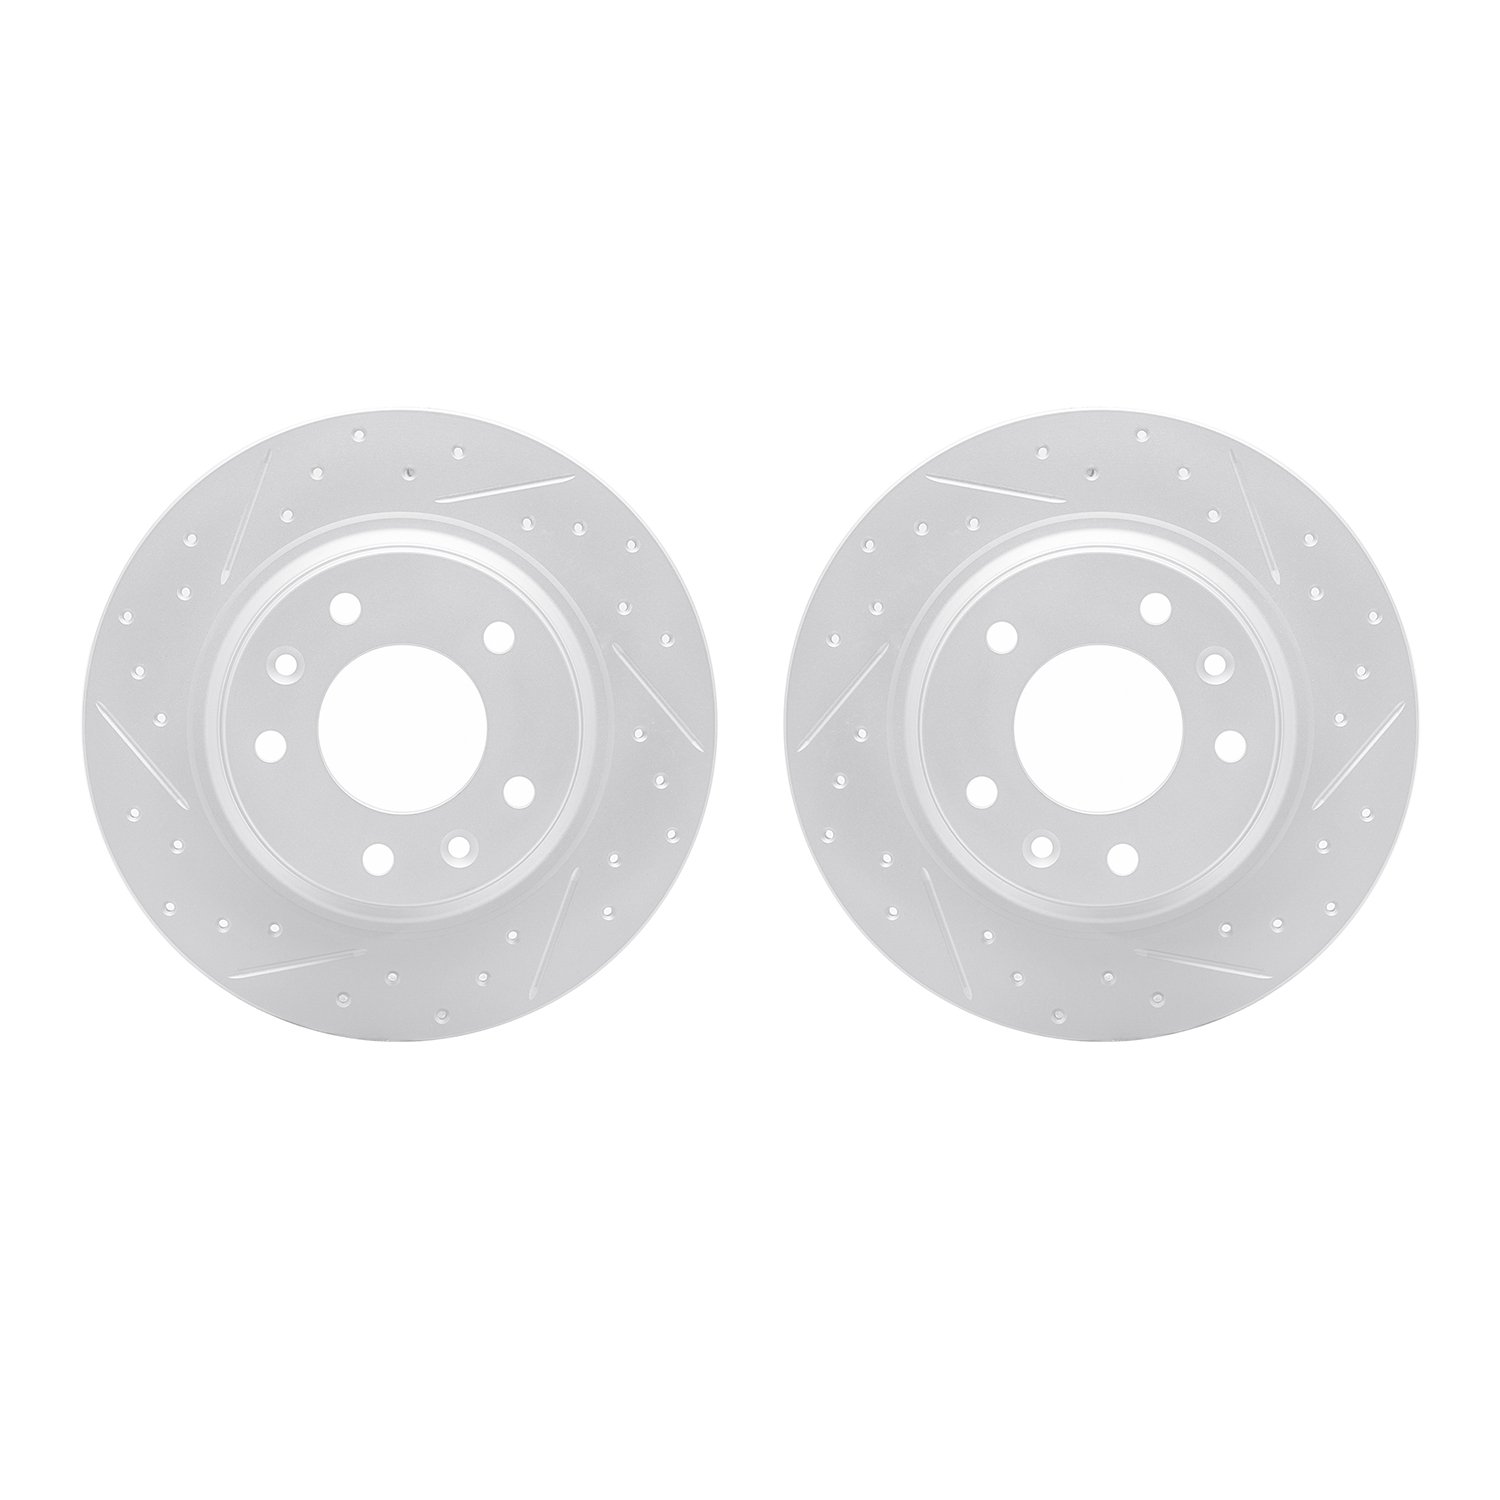 2002-54163 Geoperformance Drilled/Slotted Brake Rotors, 1998-2015 Ford/Lincoln/Mercury/Mazda, Position: Rear